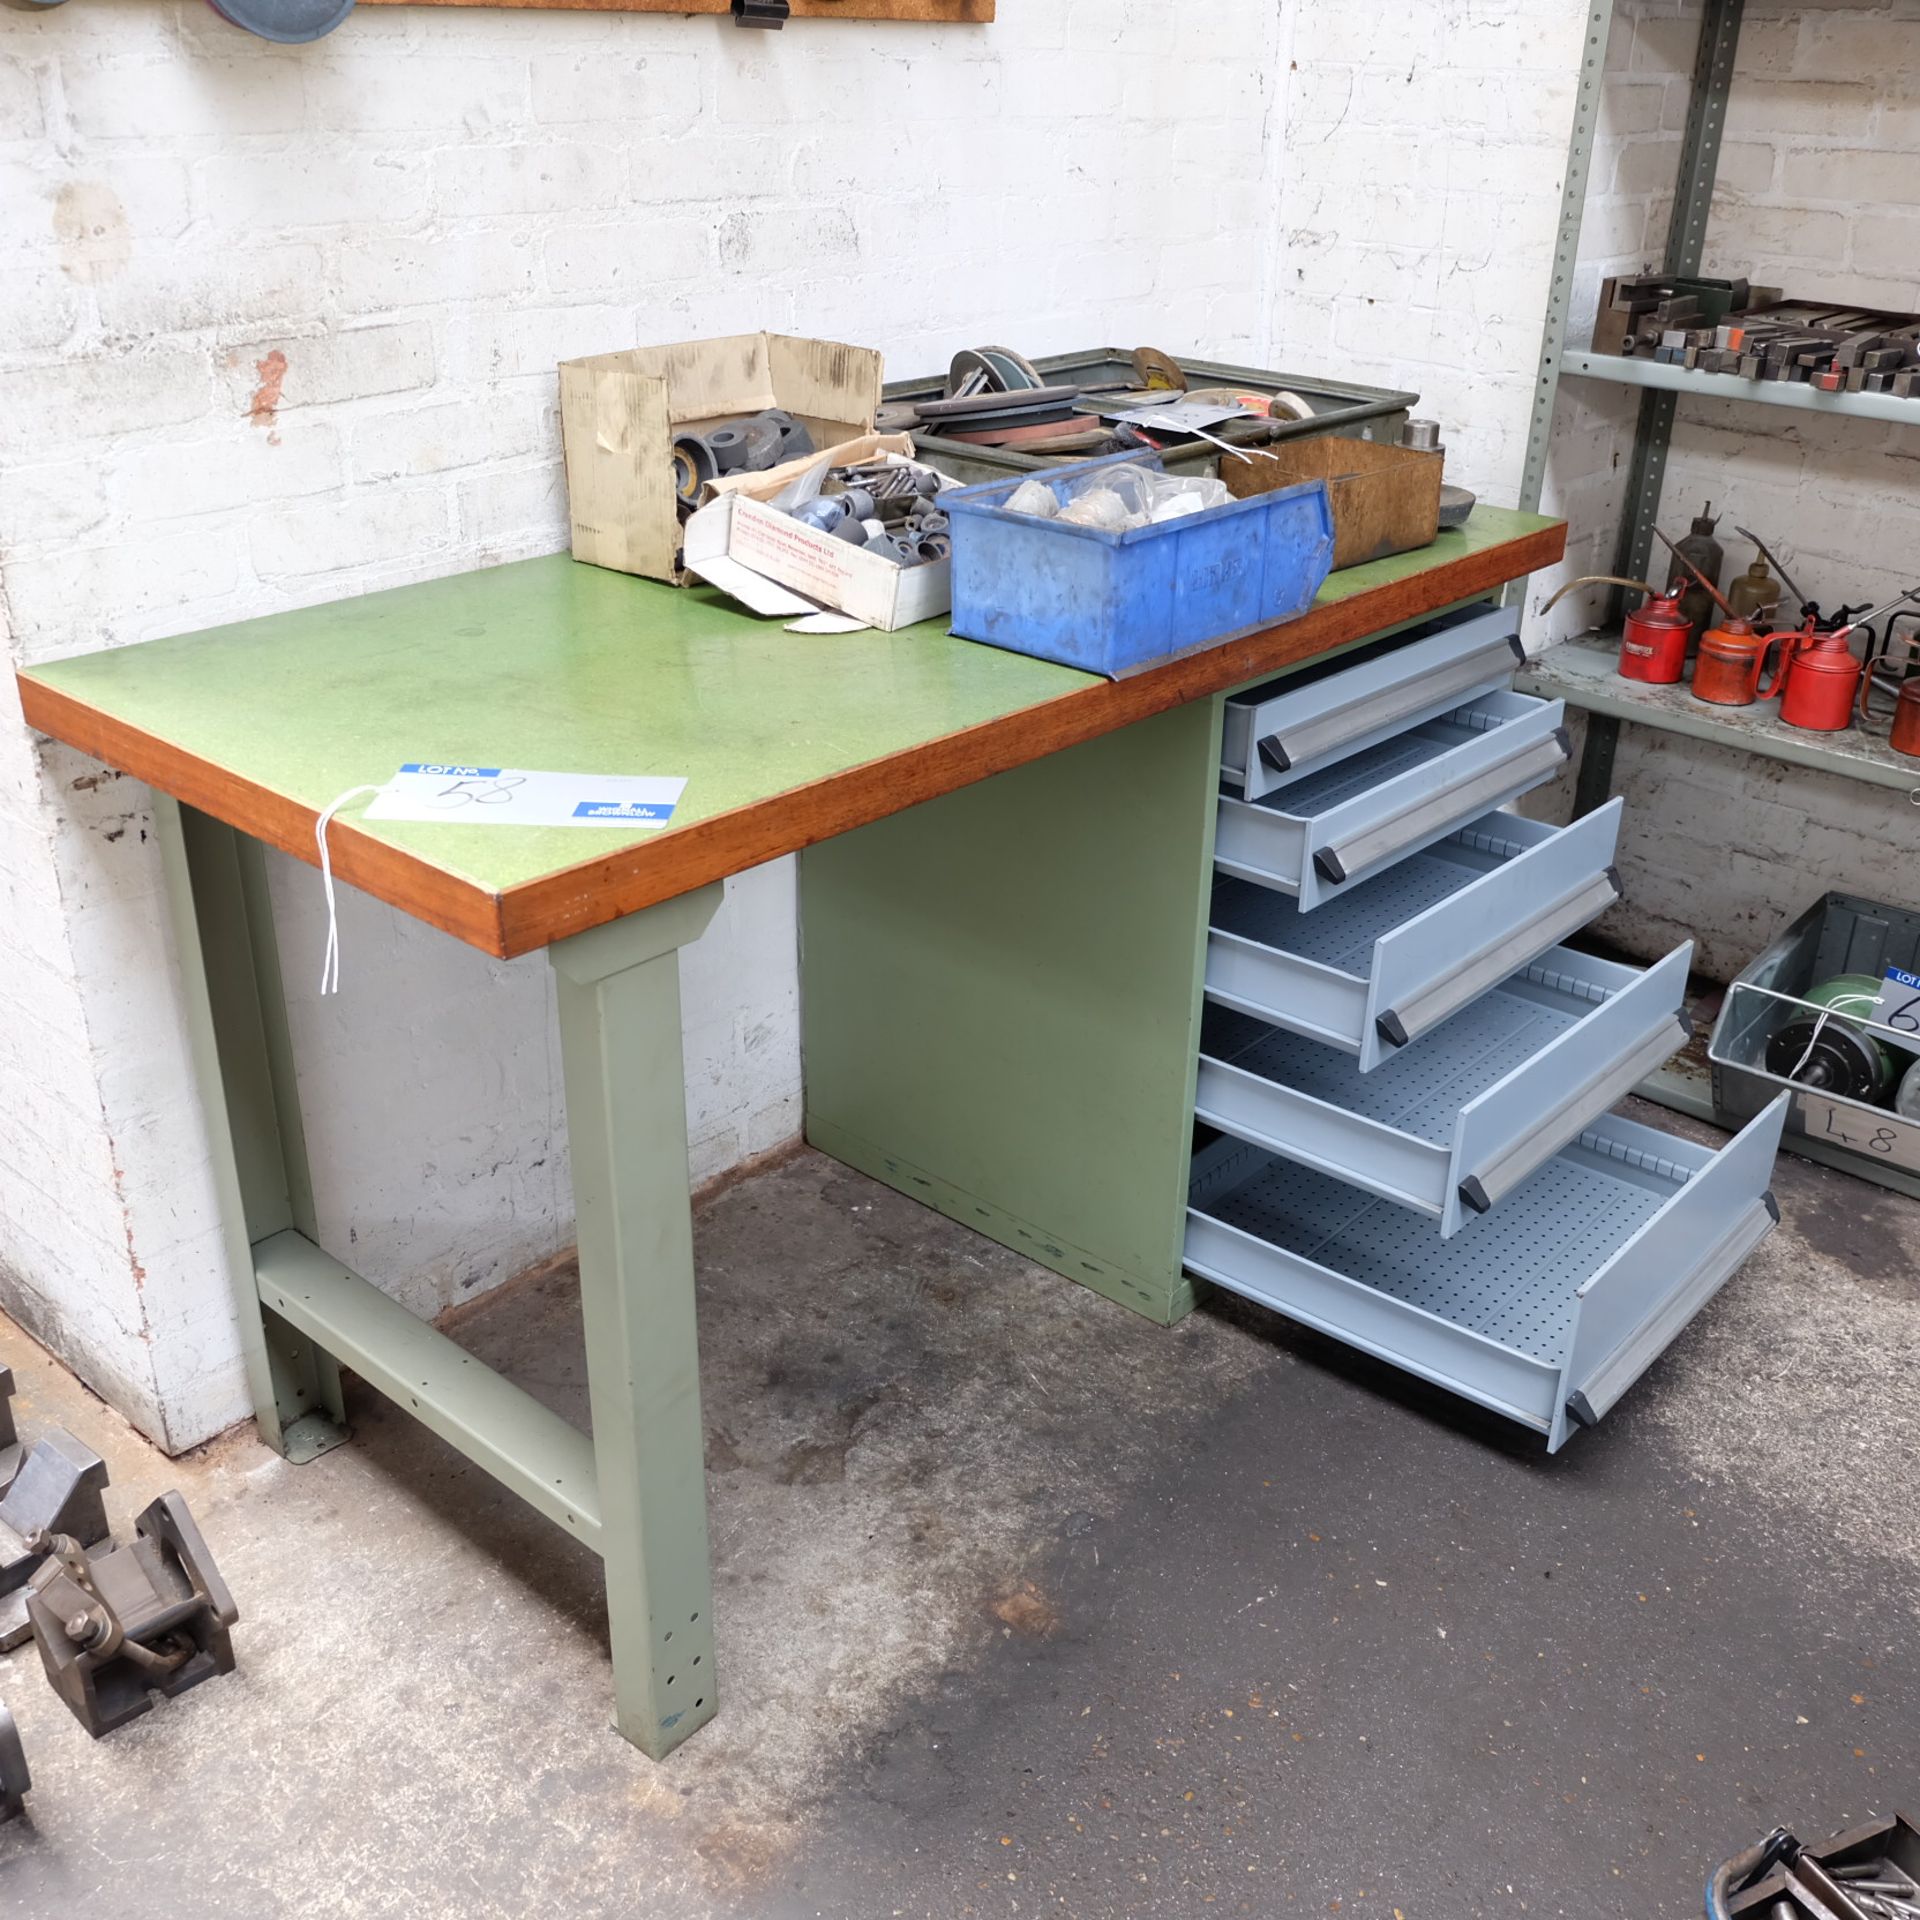 A Bott Steel Framed Timber Top Workbench, 59in x 27in x 33in h with 5 sliding drawers. - Image 2 of 2